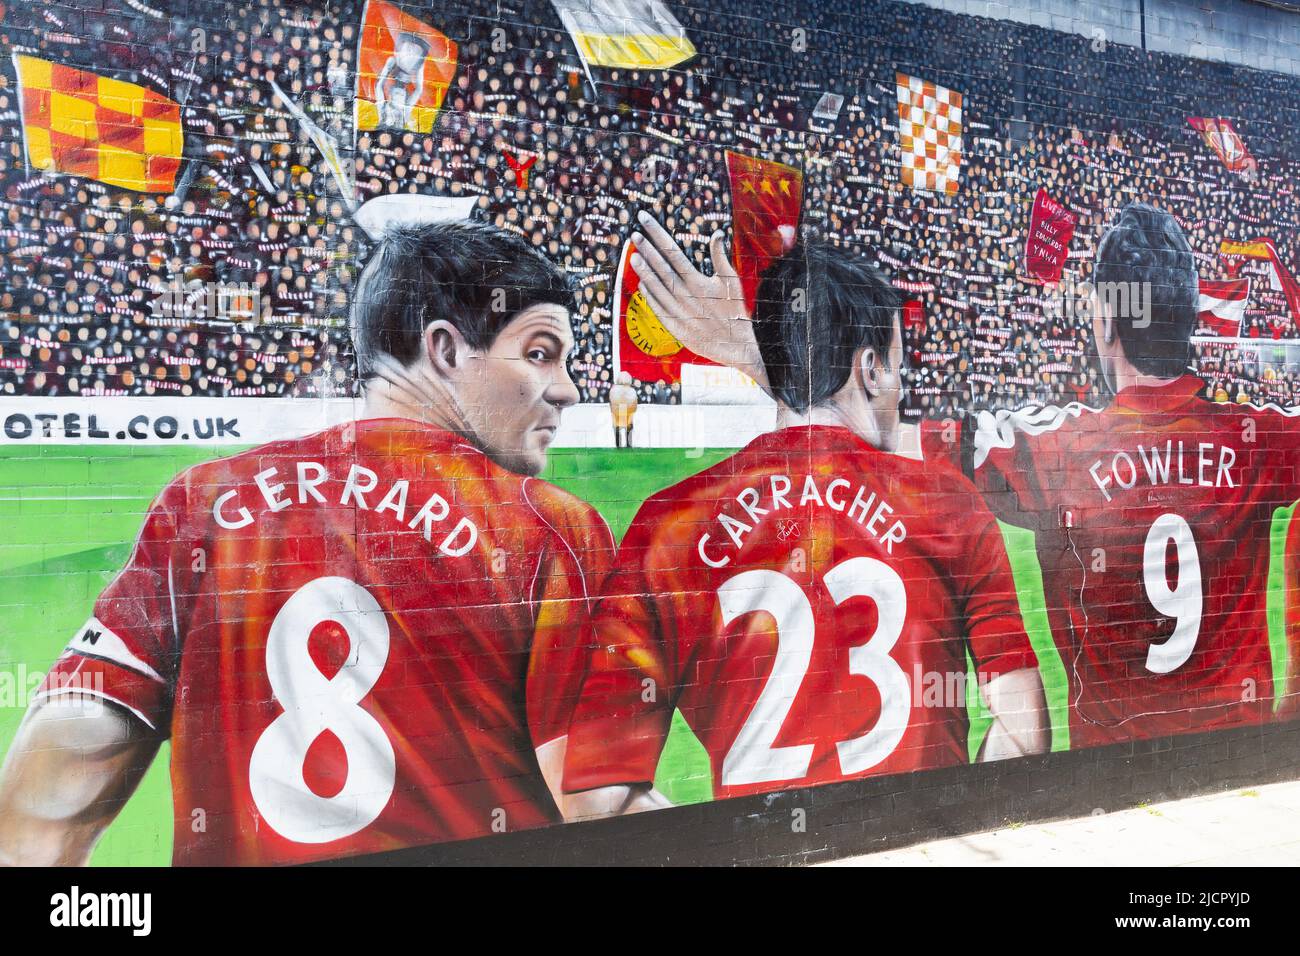 Liverpool FC mural featuring Steven Gerrard, Jamie Carragher and Robbie Fowler, Anfield, Liverpool, England, UK Stock Photo